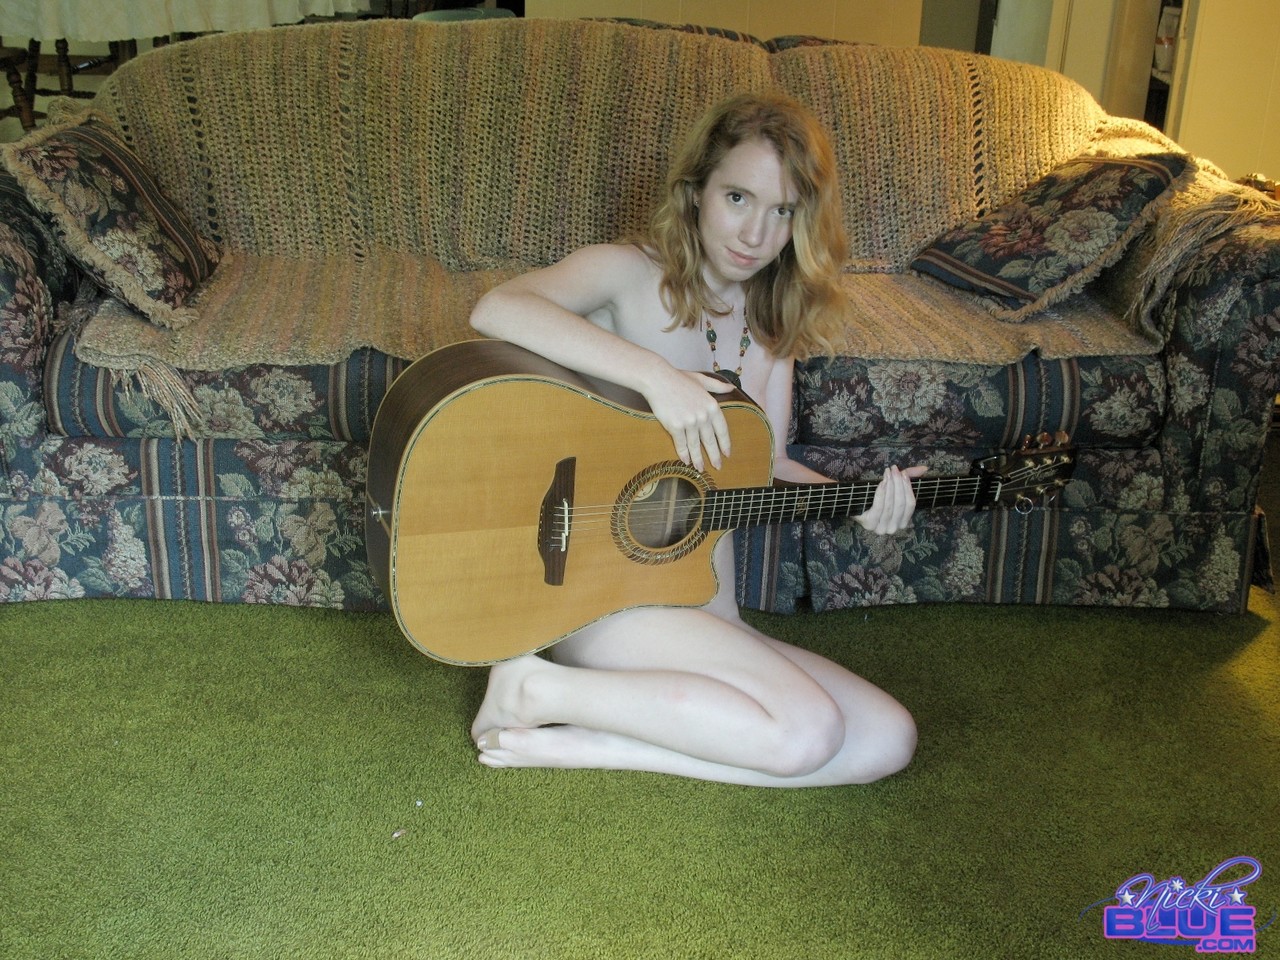 19-year-old babe Nicki Blue posing nude with a guitar in her hands porn photo #424548935 | Pornstar Platinum Pics, Nicki Blue, Redhead, mobile porn